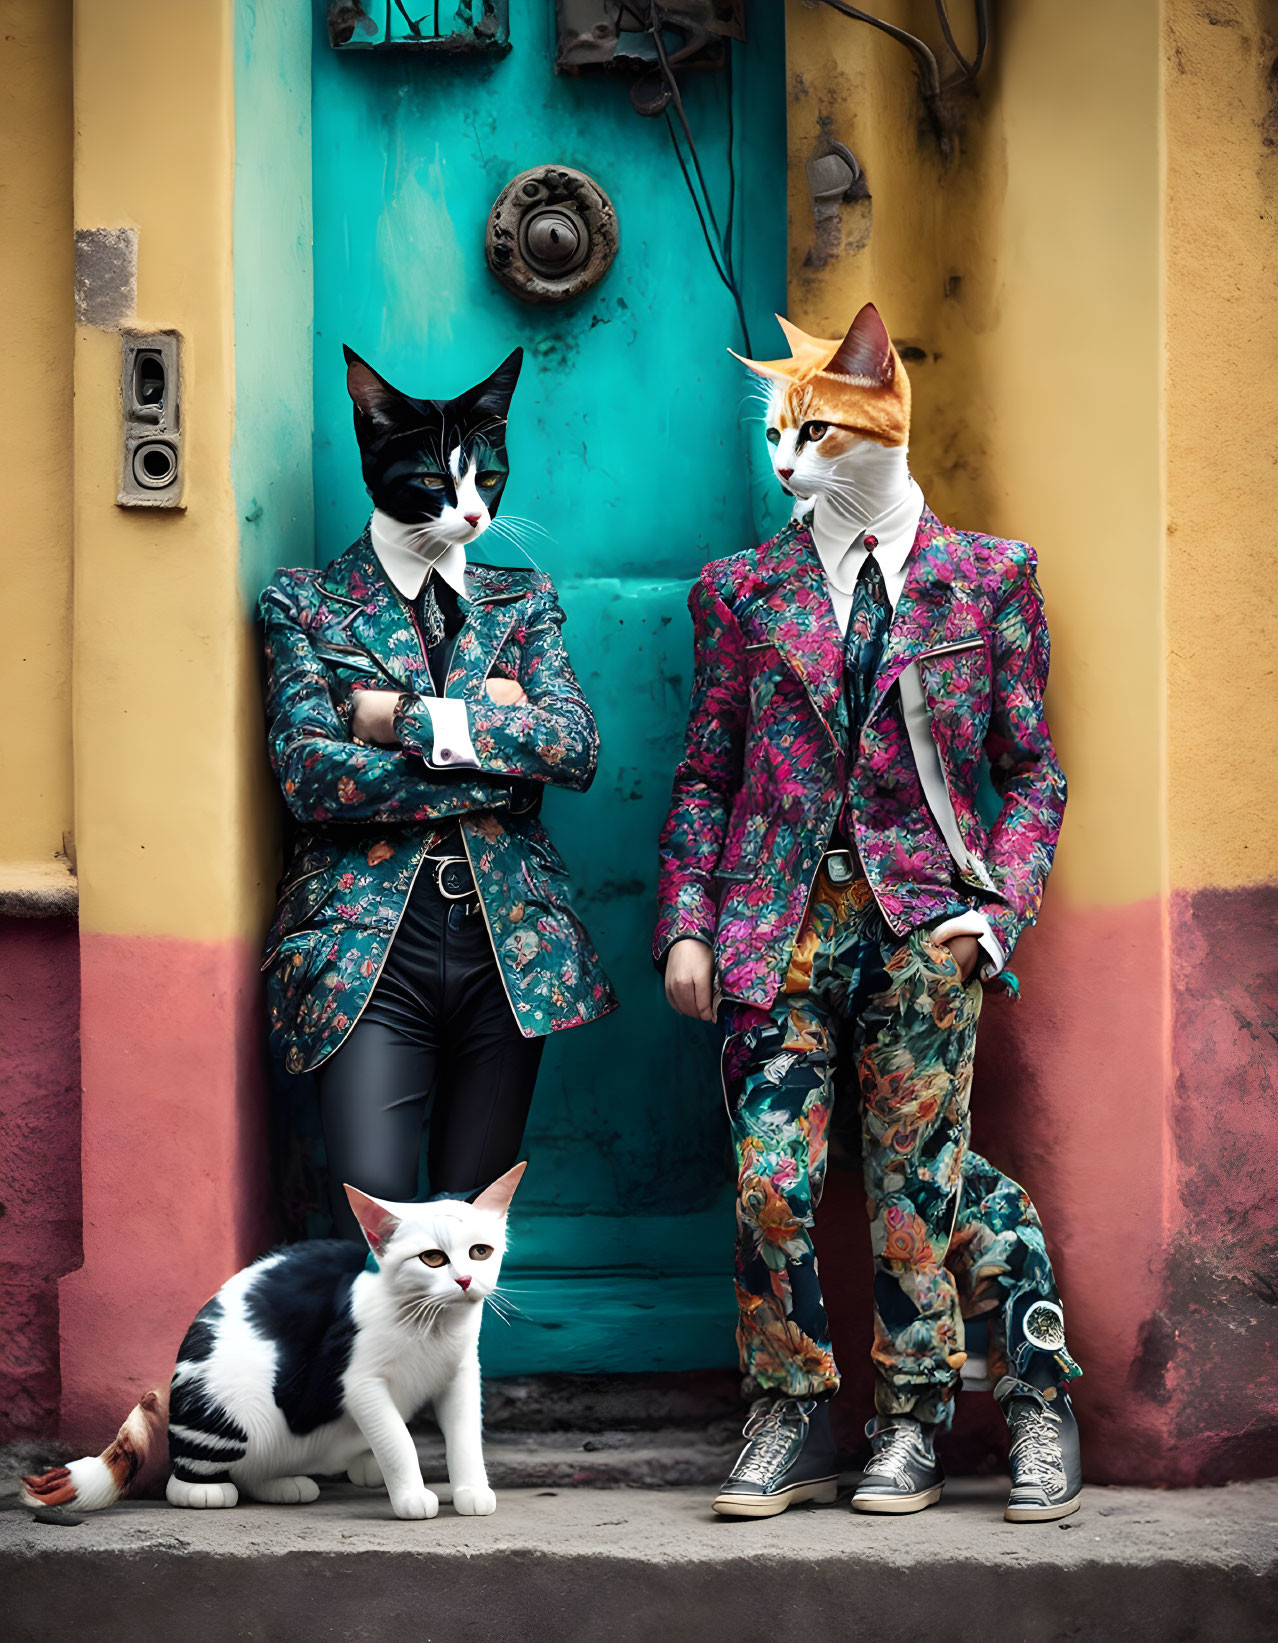 Colorful cat-headed individuals posing against vibrant wall with real cat.